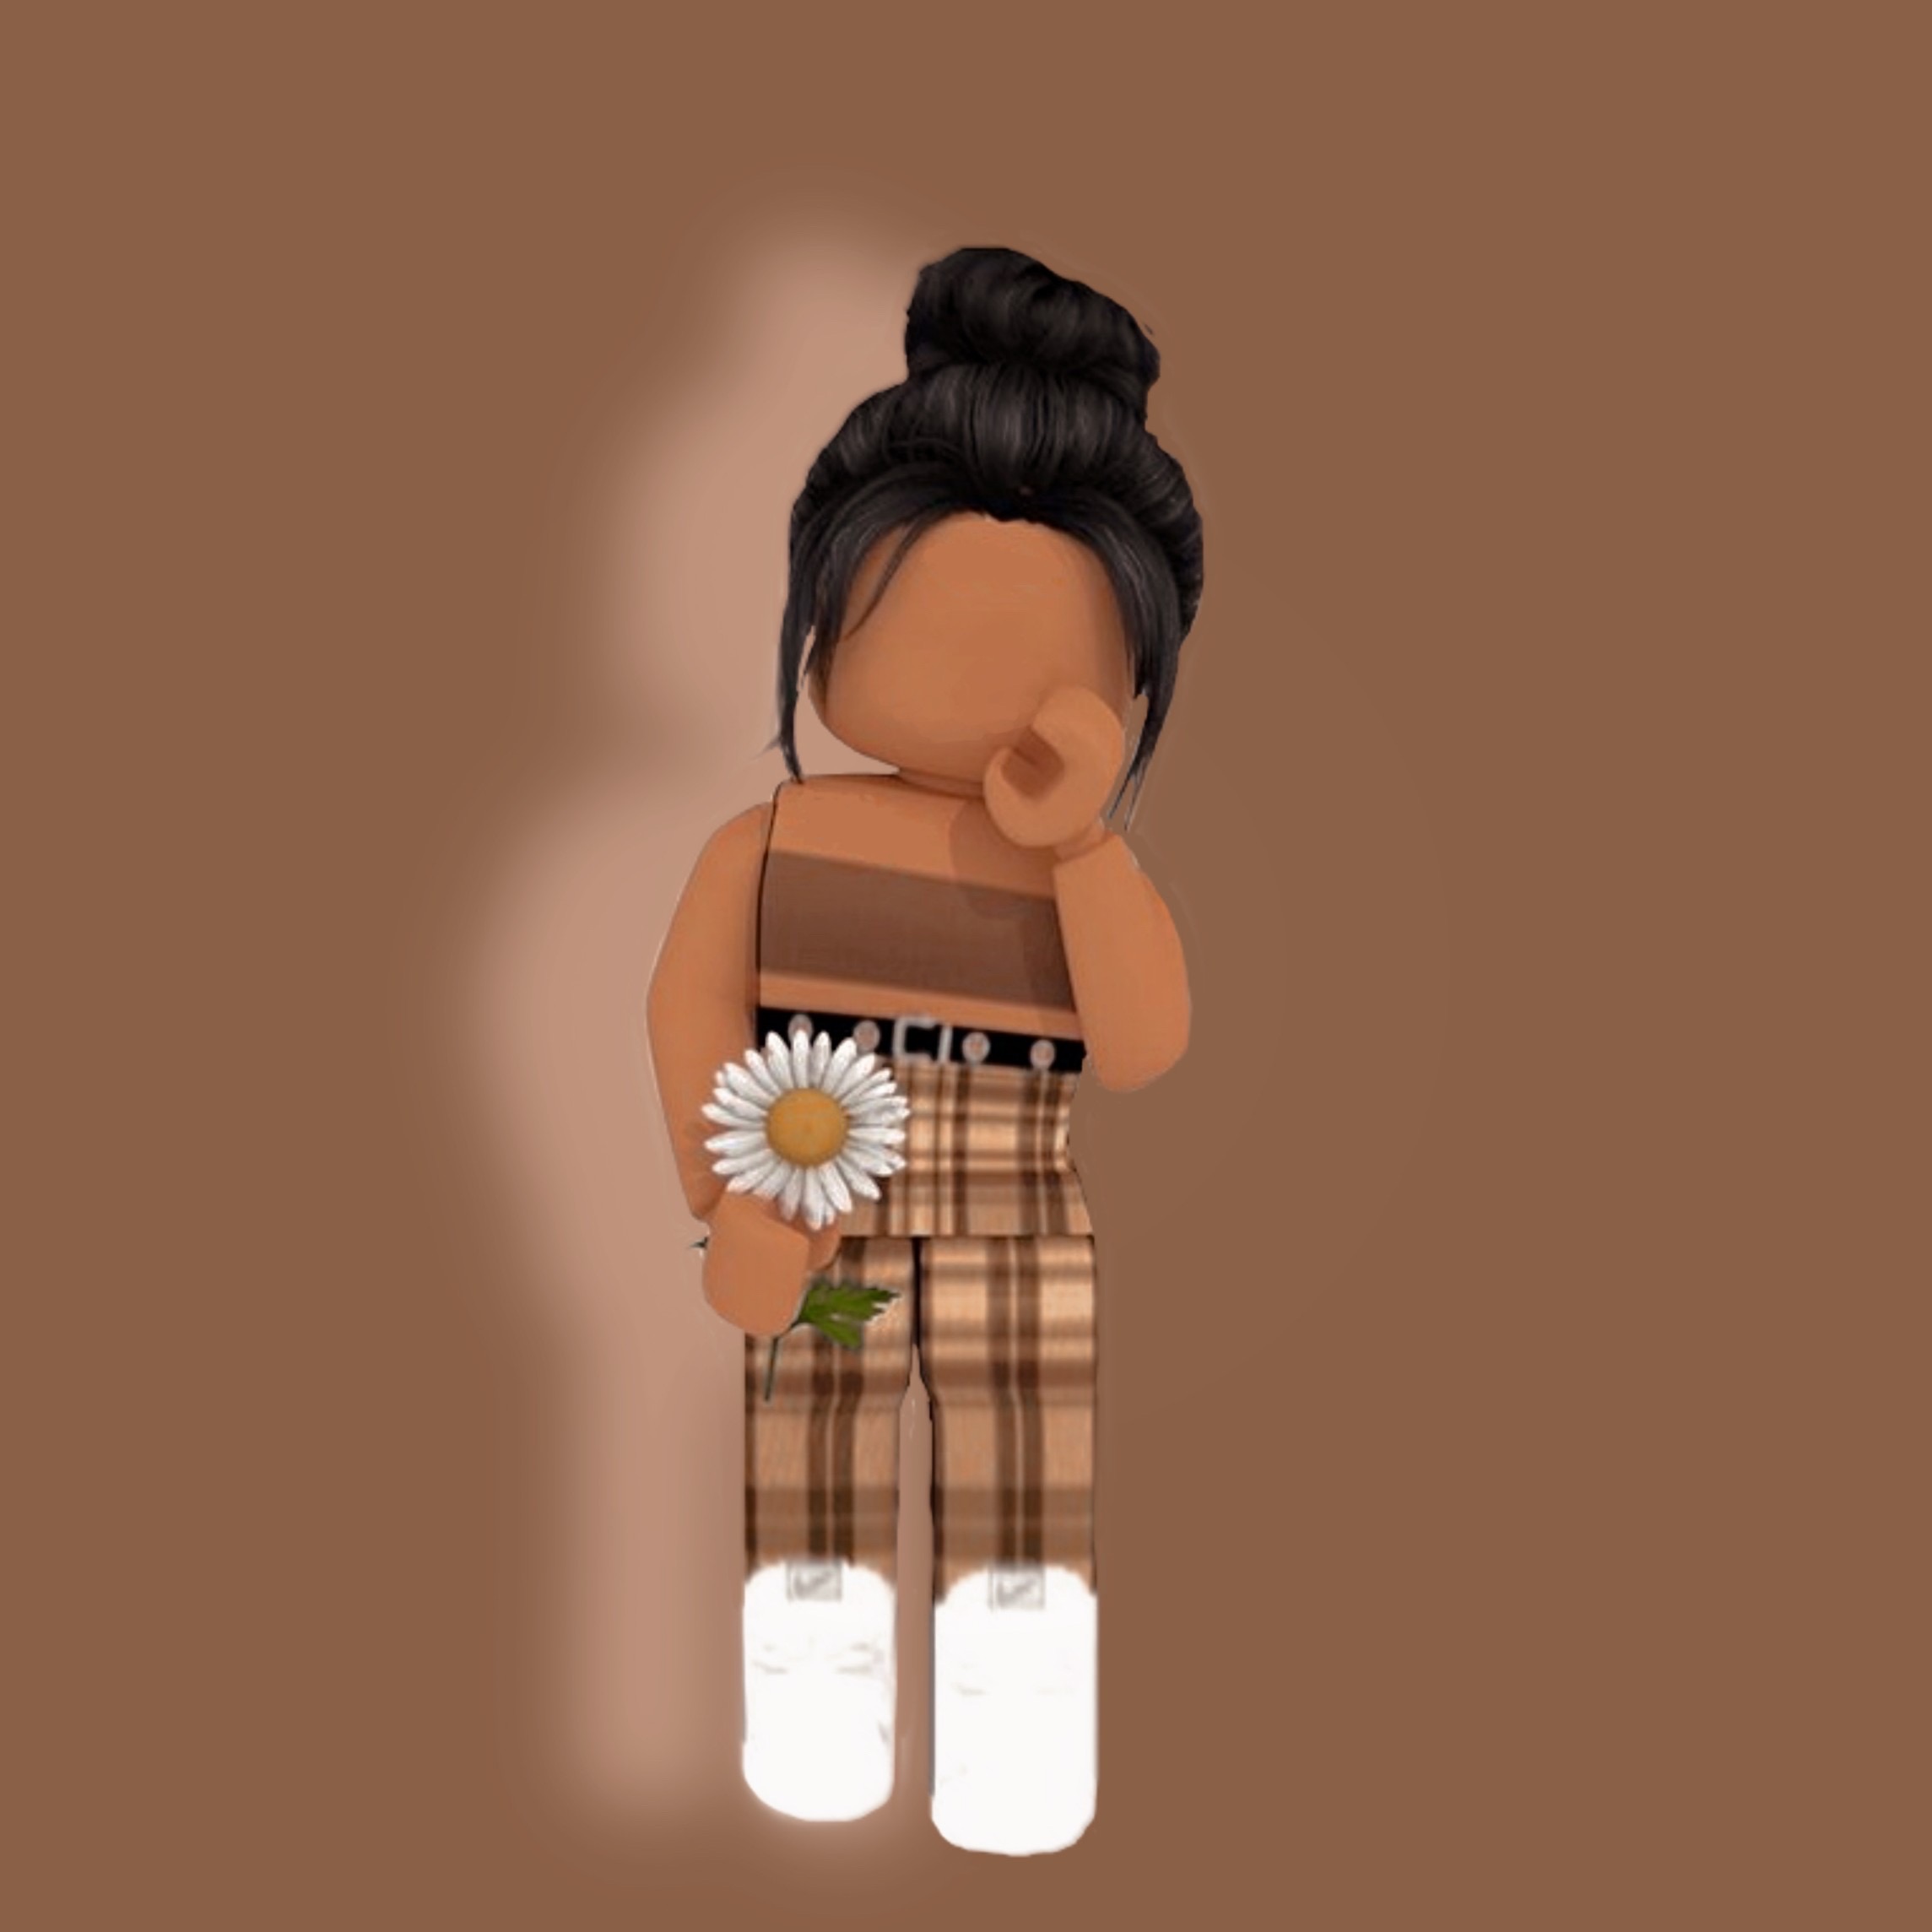 Roblox Aesthetic Cute Awe Image By 𝕃𝕠𝕧𝕝𝕖𝕪 - roblox photos cute